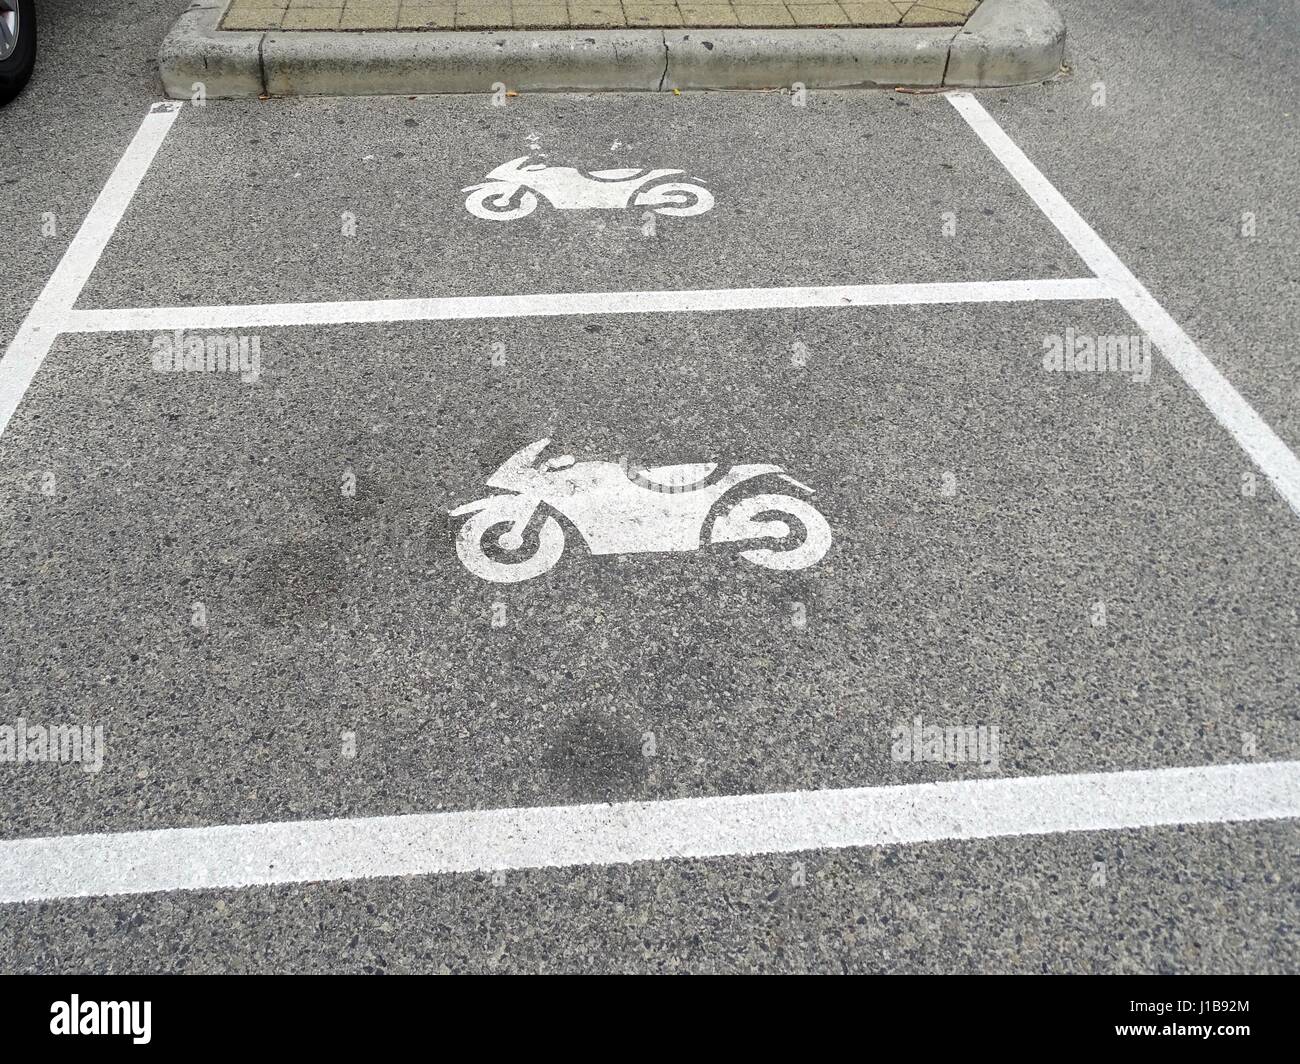 Reserved motorcycle parking spaces Stock Photo